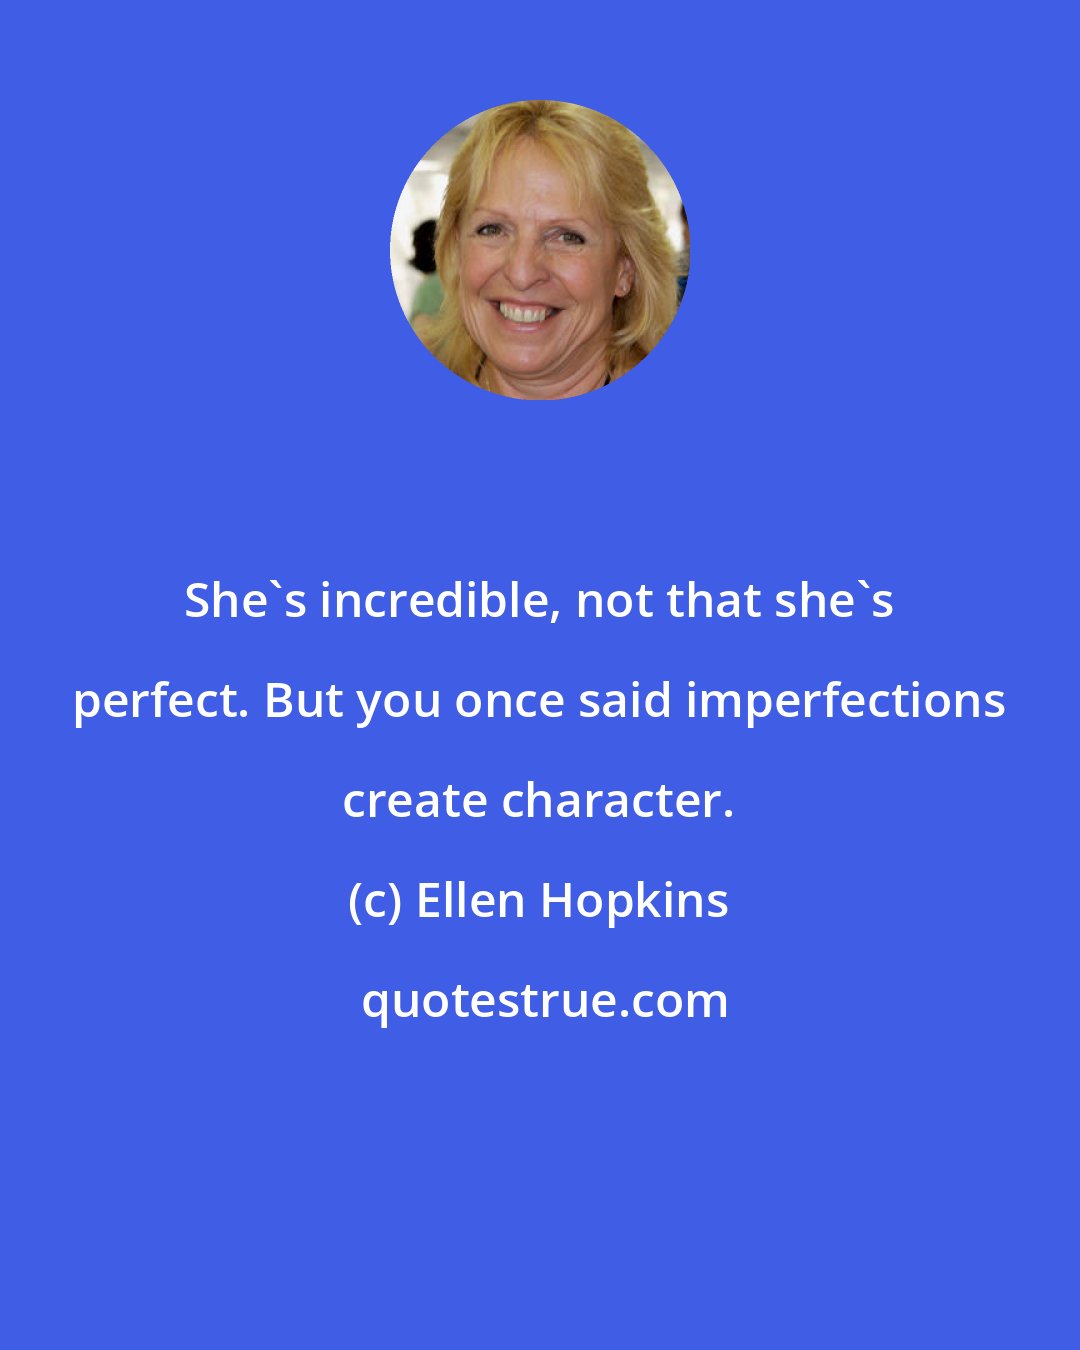 Ellen Hopkins: She's incredible, not that she's perfect. But you once said imperfections create character.